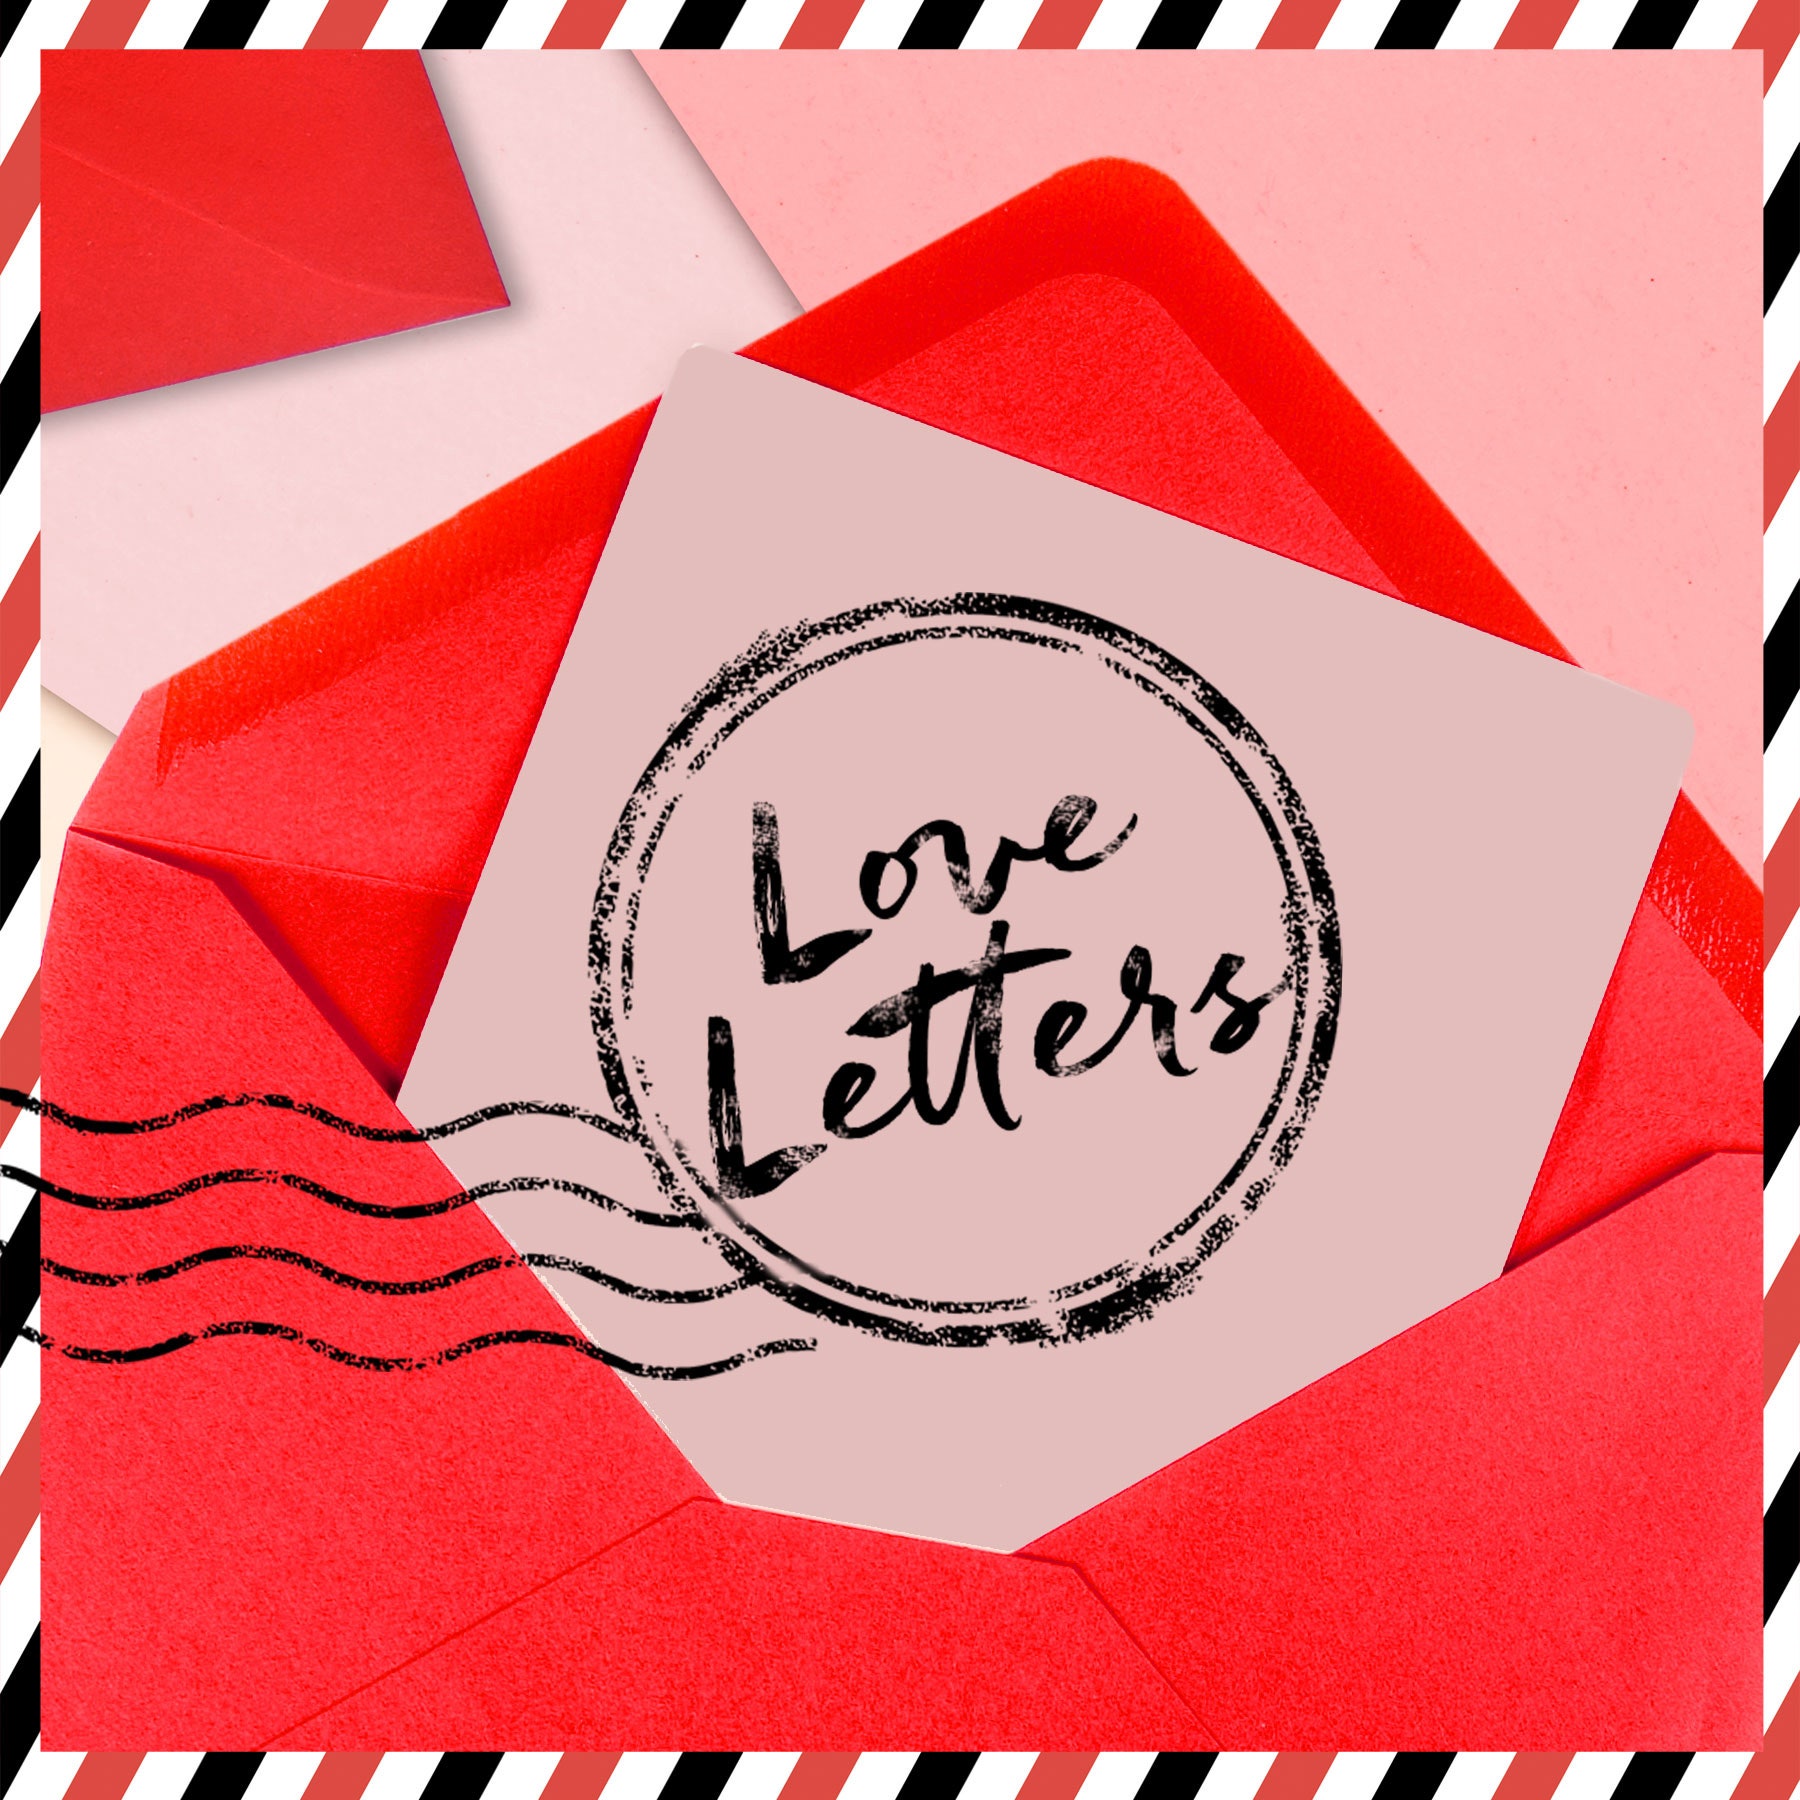 Love Letters or Liability Letters